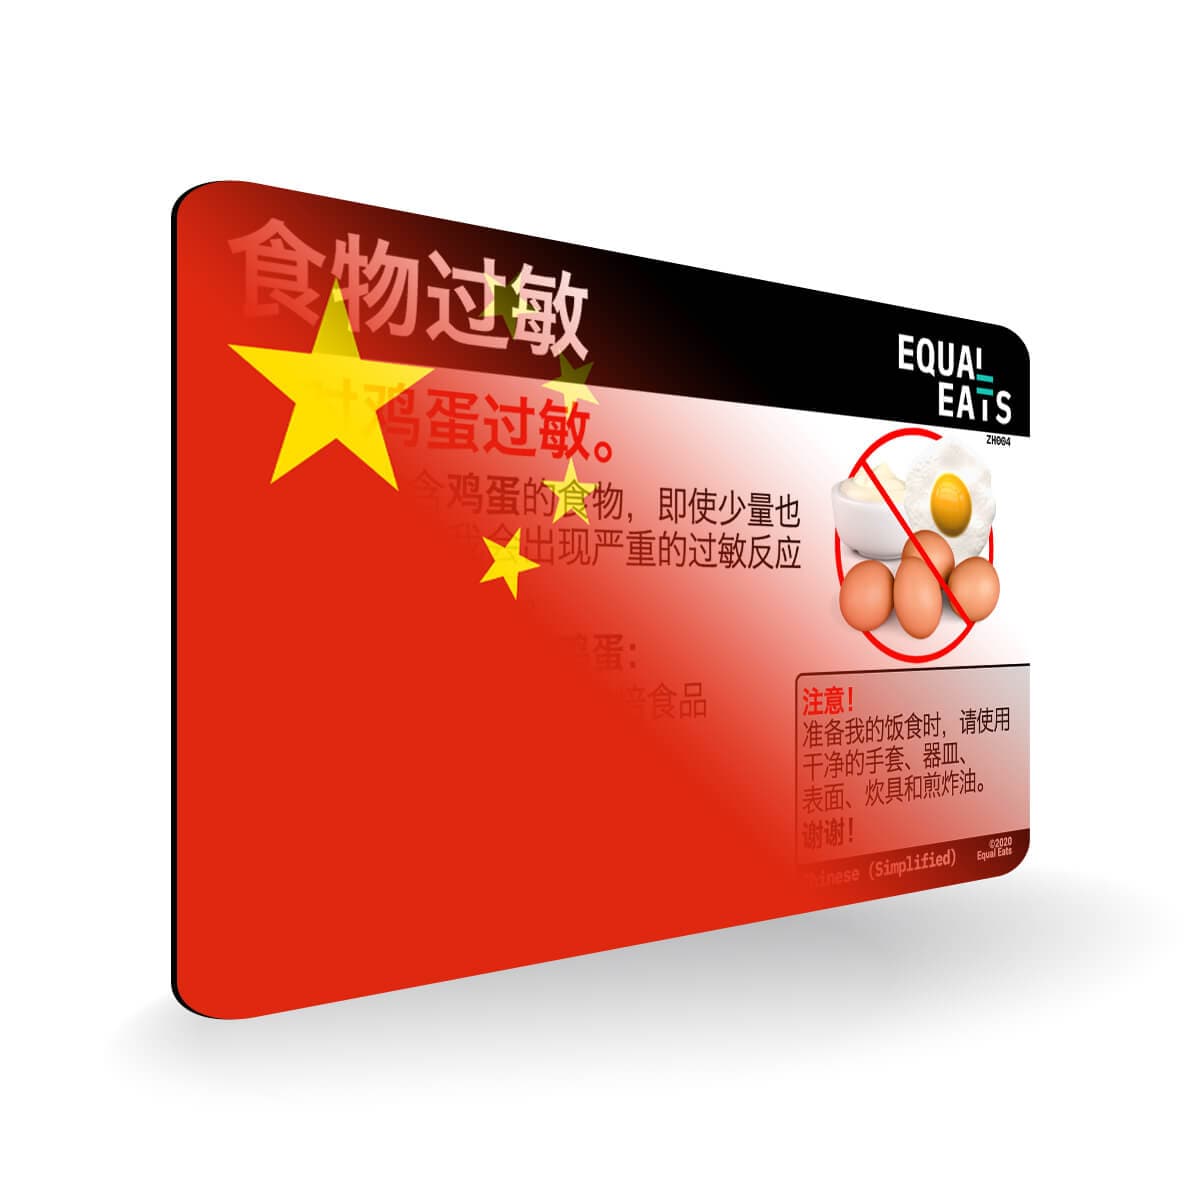 Egg Allergy in Simplified Chinese. Egg Allergy Card for China